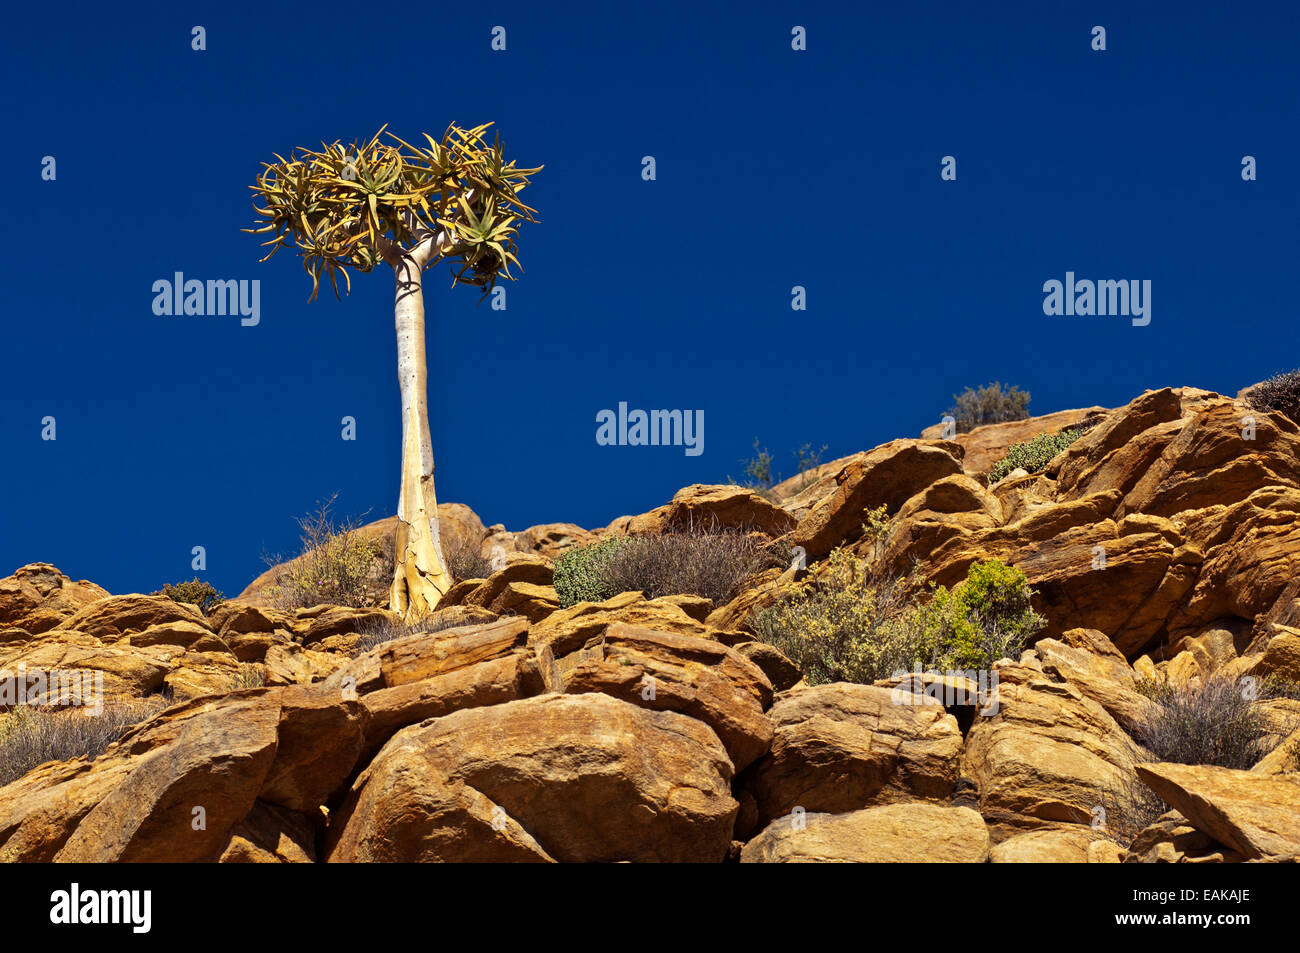 Quiver Tree or Kokerboom (Aloe dichotoma), Goegap Nature Reserve, Springbok, Namaqualand, Northern Cape, South Africa Stock Photo